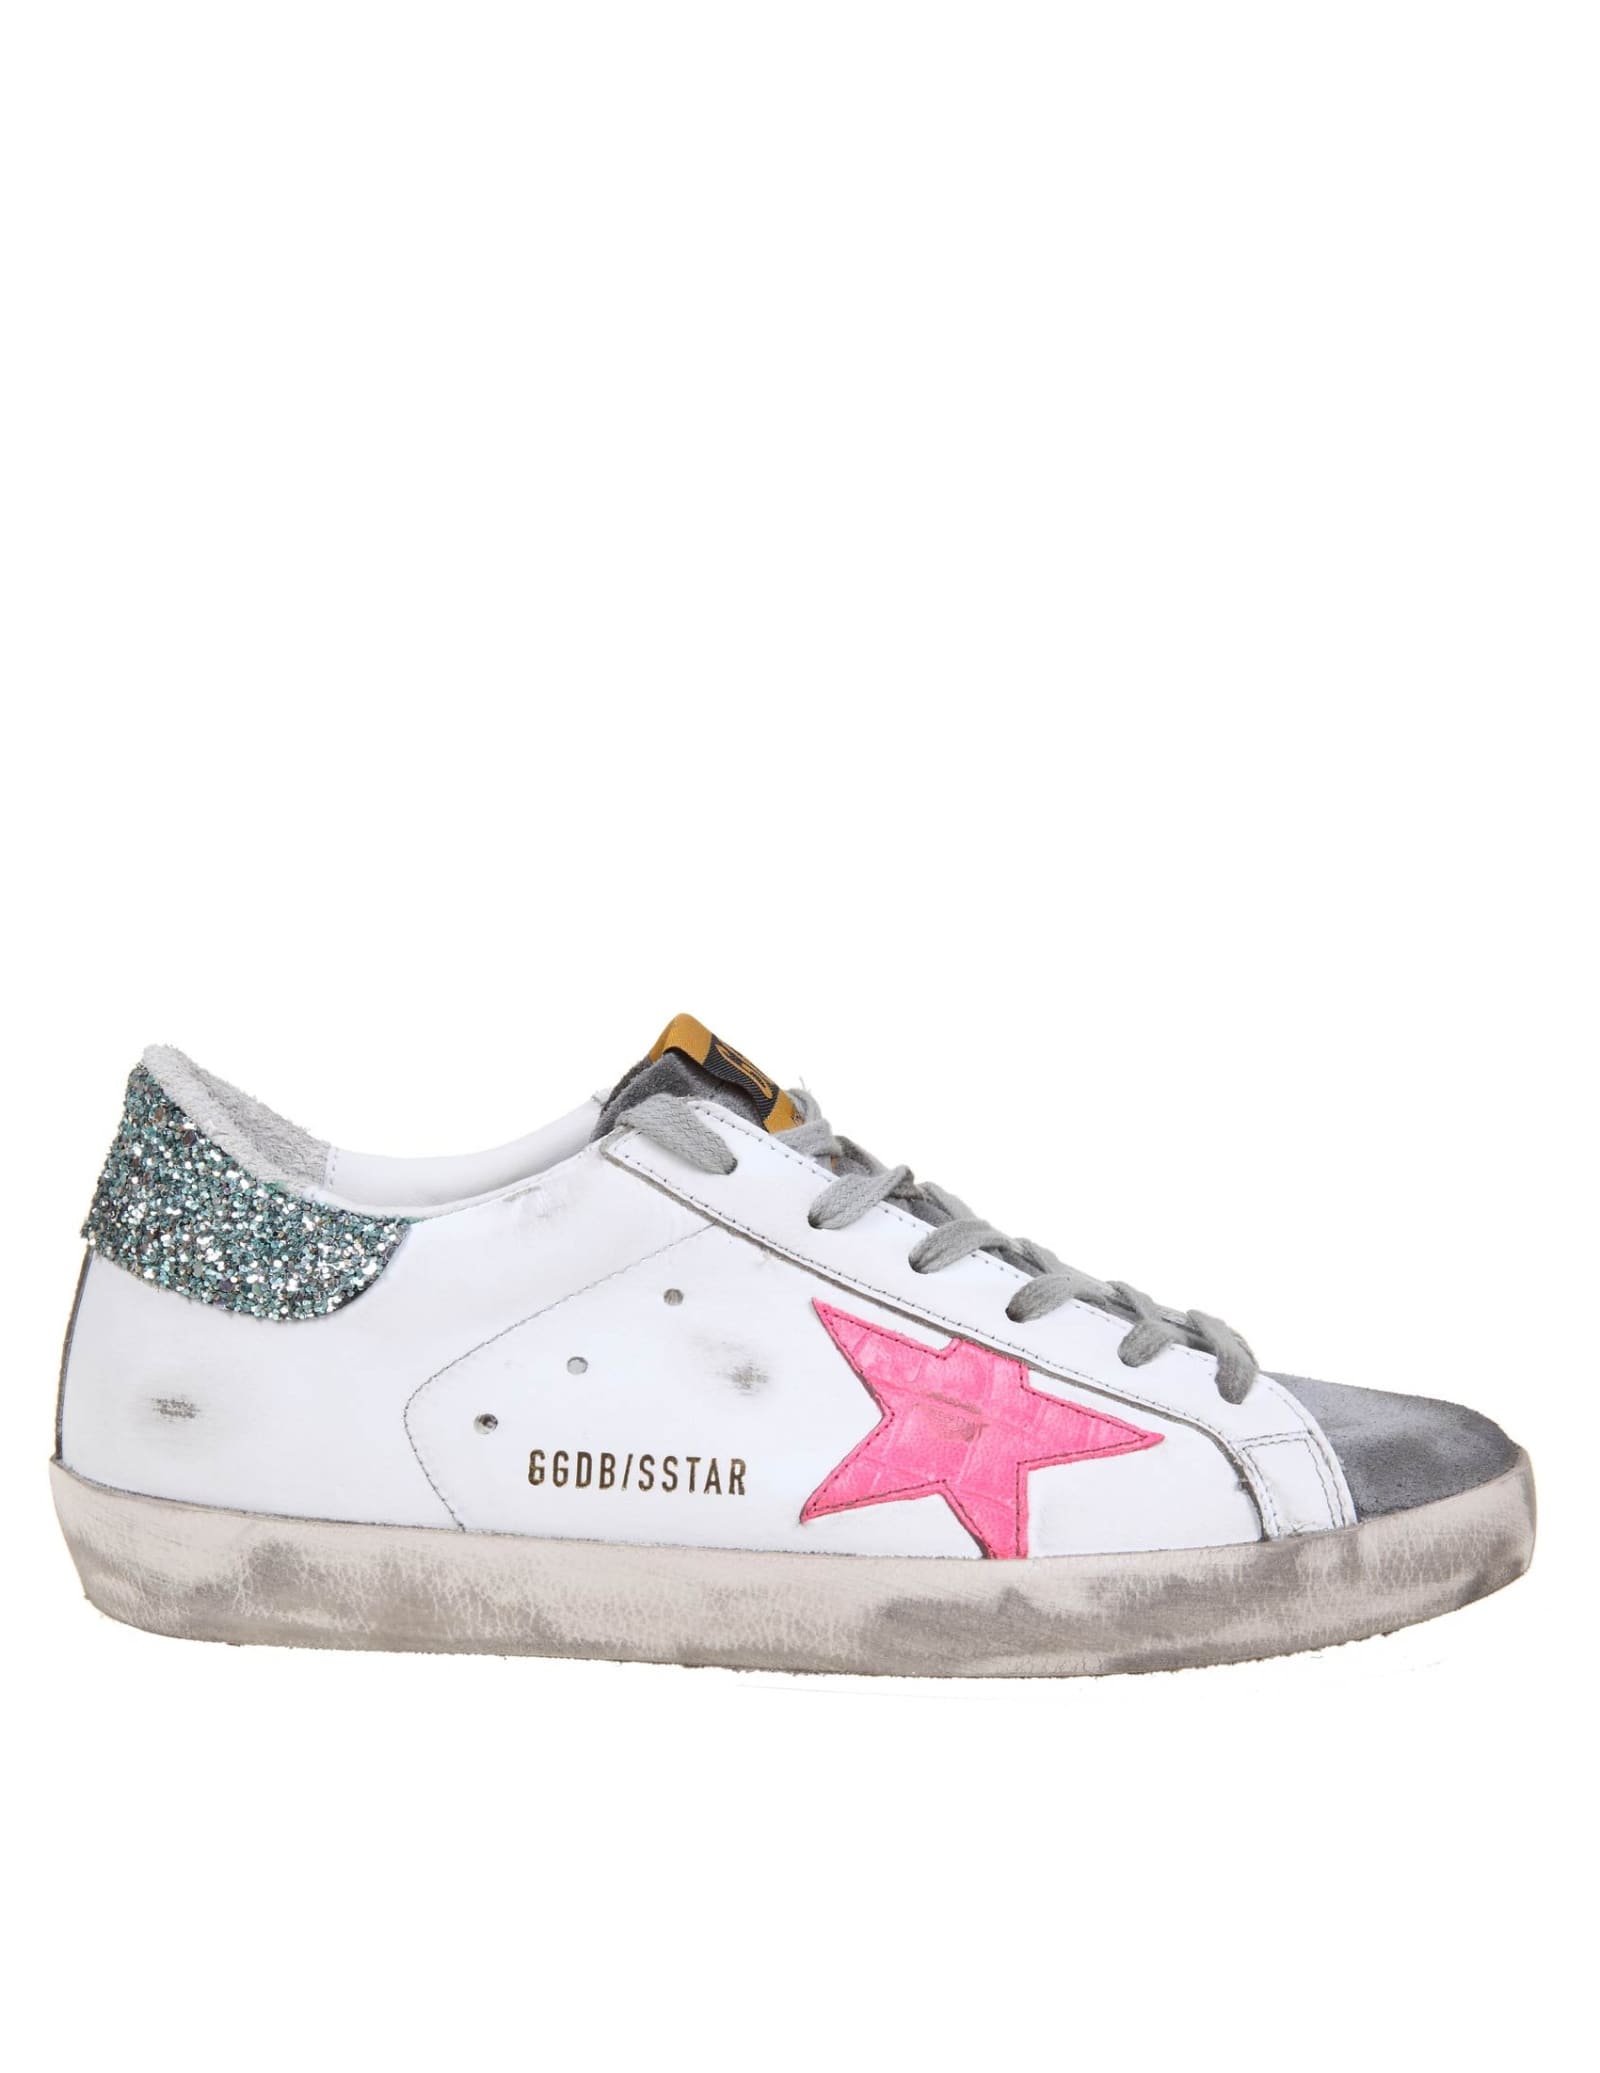 Golden Goose Super Star Sneakers In White And Gray Leather